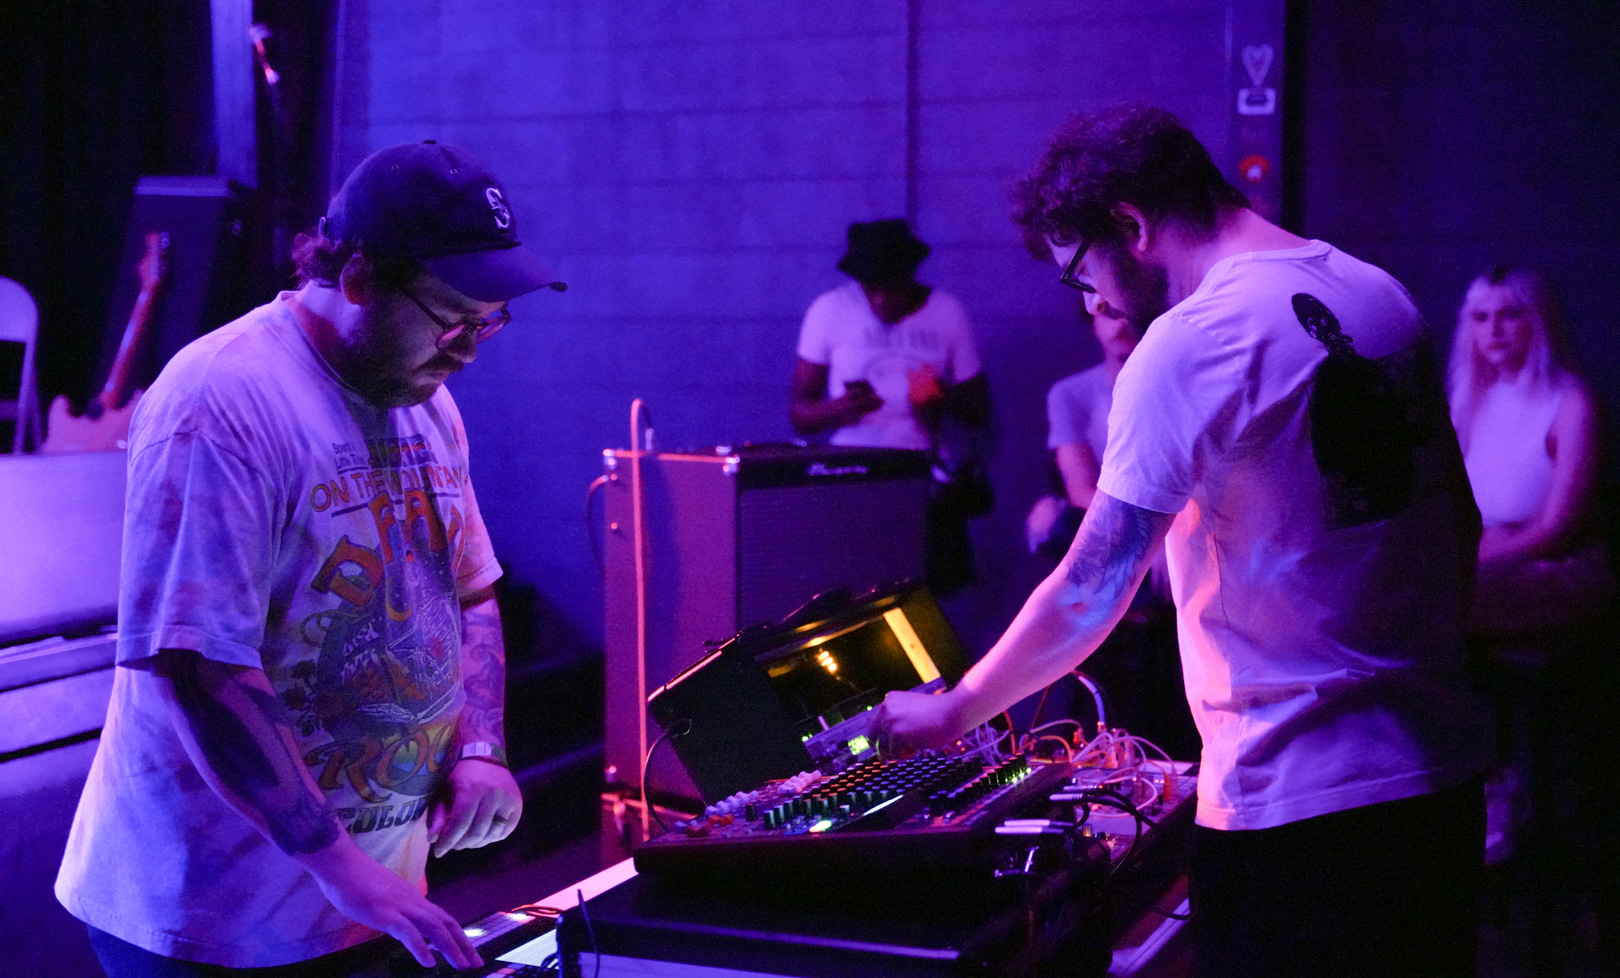 Two people playing with synth machines